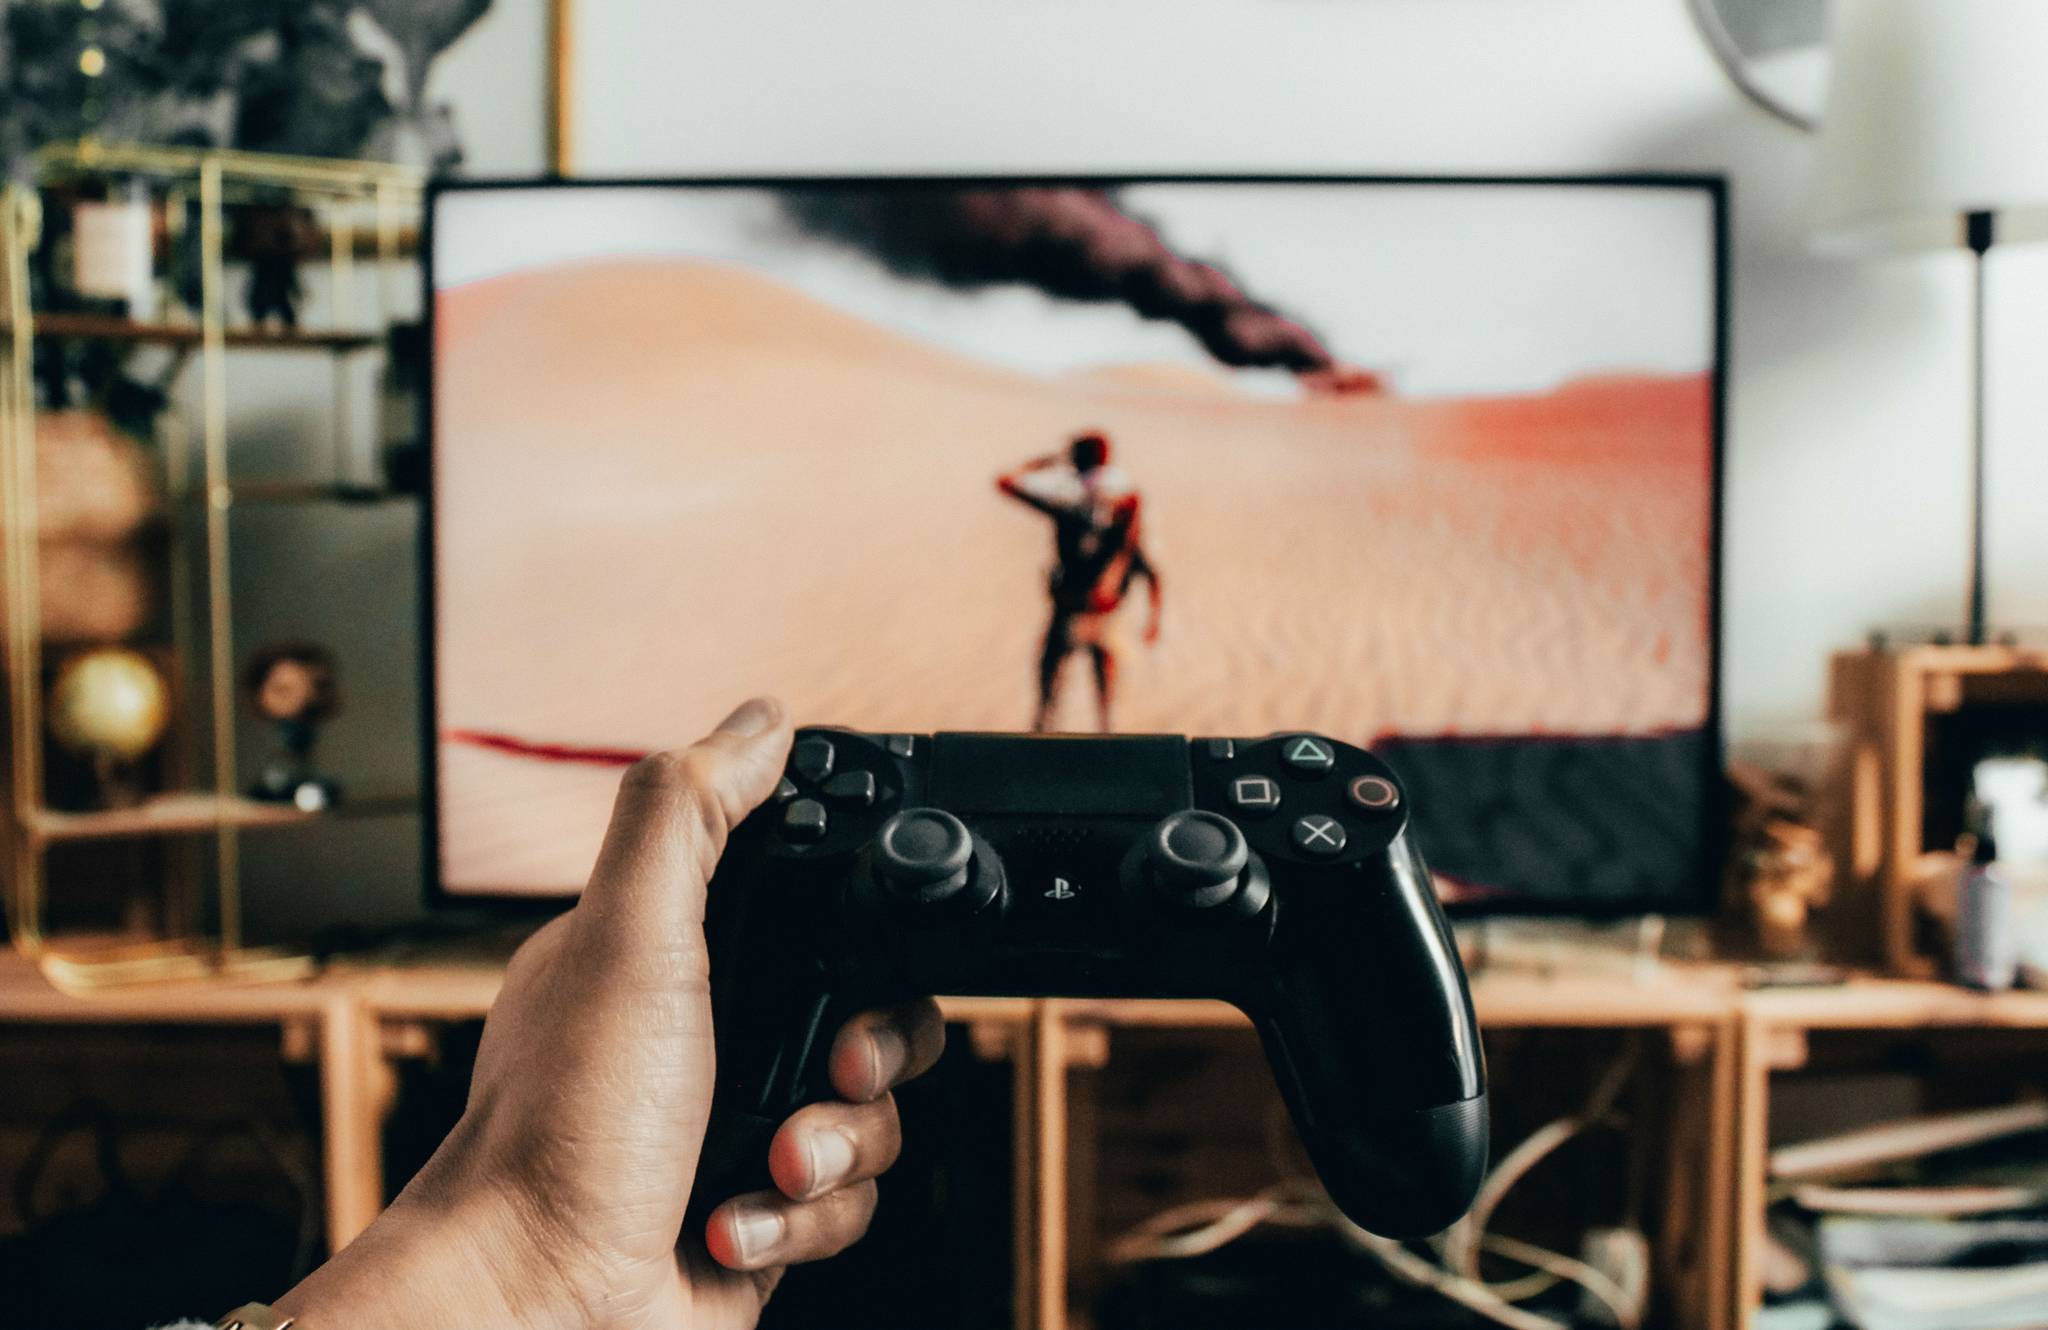 How has COVID-19 impacted Aussie gaming habits?